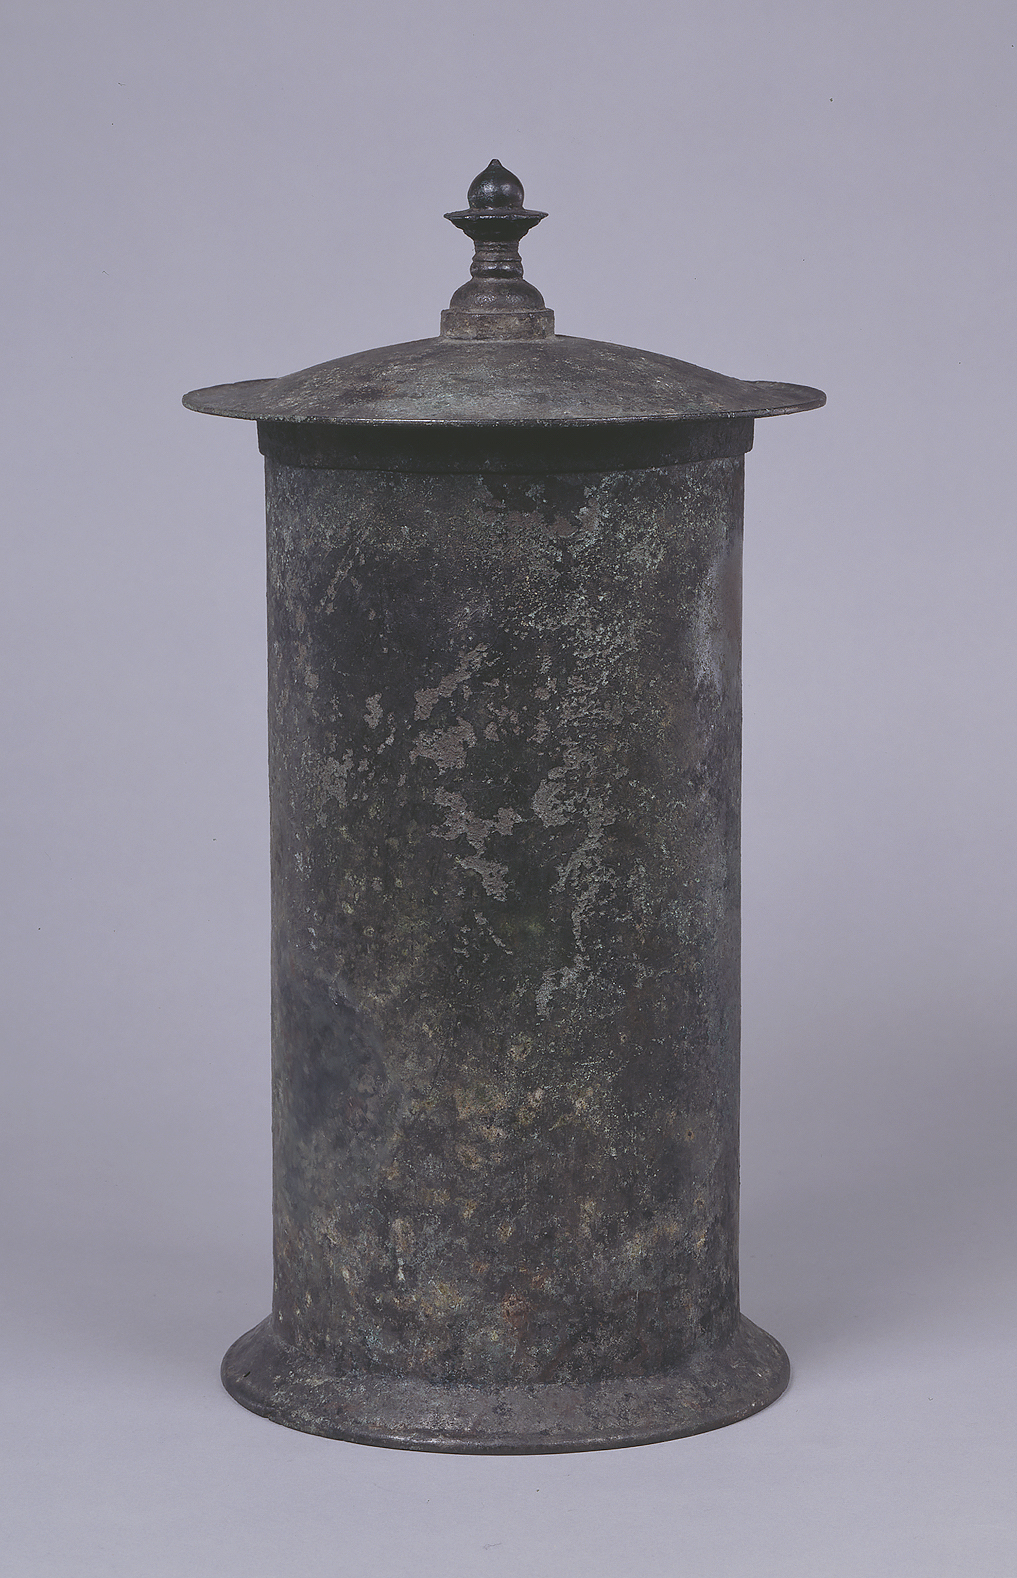 Important Cultural Property. Sutra Container. Excavated from Hanase
Bessho Sutra Mound, Kyoto. Agency for Cultural Affairs